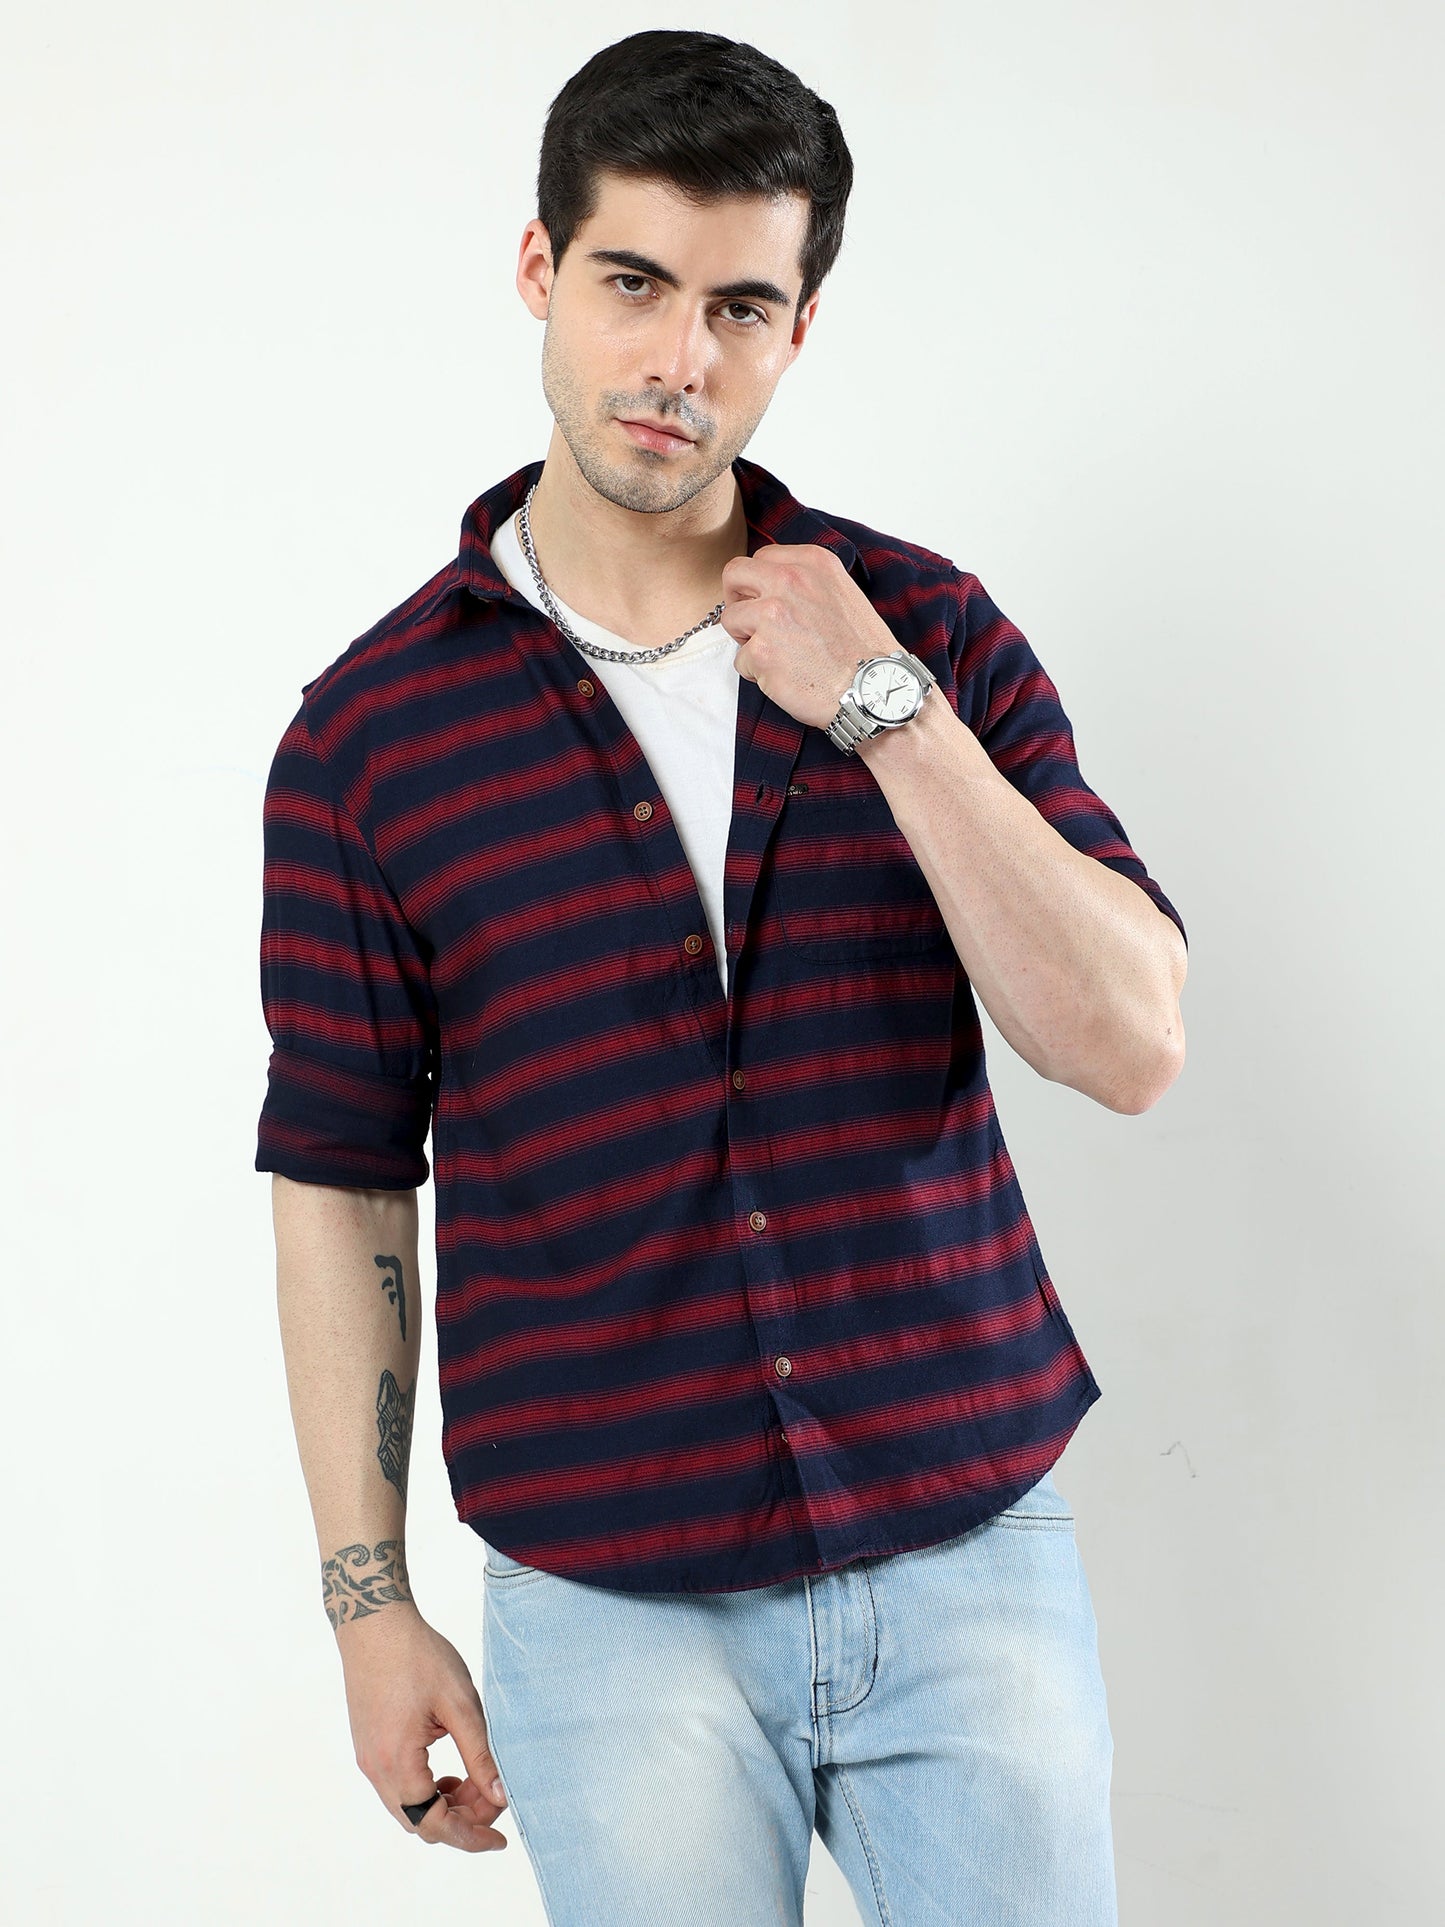 Tealish Blue and Wine Berry Striped Shirt